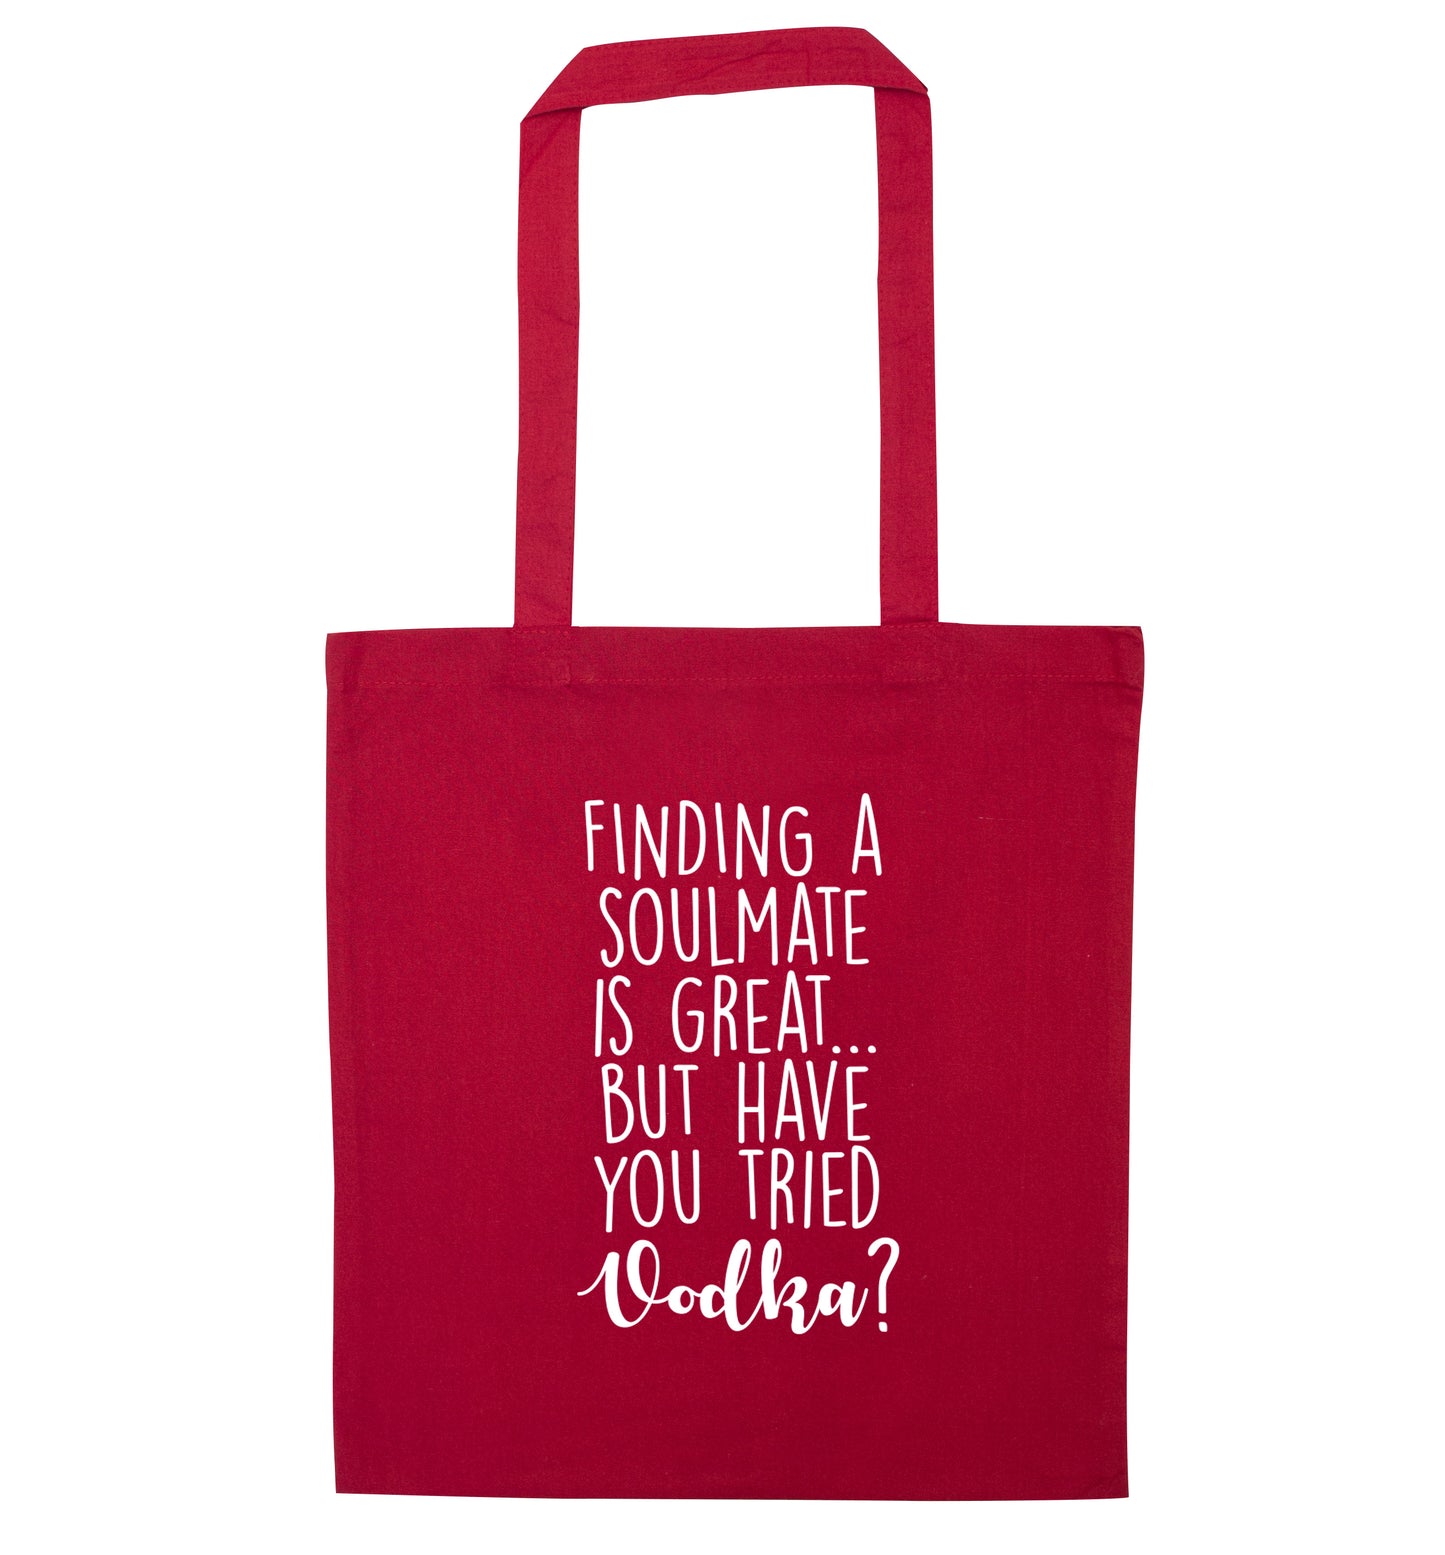 Finding a soulmate is great but have you tried vodka? red tote bag